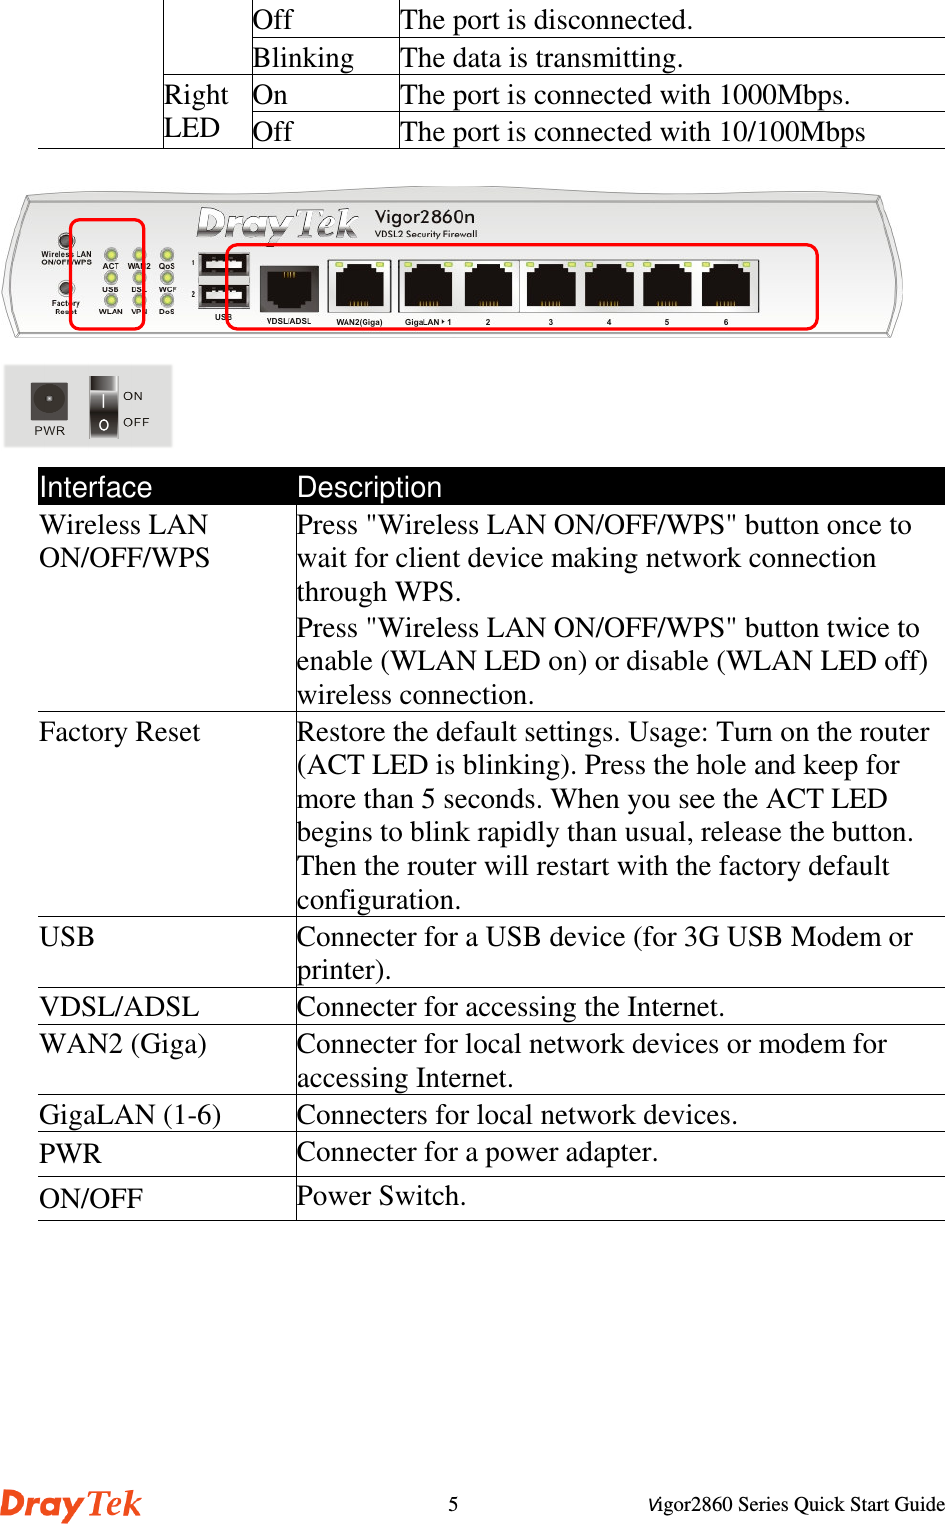 Vigor2860 Series Quick Start Guide5Off The port is disconnected.Blinking The data is transmitting.On The port is connected with 1000Mbps.RightLED Off The port is connected with 10/100MbpsInterface DescriptionWireless LANON/OFF/WPSPress &quot;Wireless LAN ON/OFF/WPS&quot; button once towait for client device making network connectionthrough WPS.Press &quot;Wireless LAN ON/OFF/WPS&quot; button twice toenable (WLAN LED on) or disable (WLAN LED off)wireless connection.Factory Reset Restore the default settings. Usage: Turn on the router(ACT LED is blinking). Press the hole and keep formore than 5 seconds. When you see the ACT LEDbegins to blink rapidly than usual, release the button.Then the router will restart with the factory defaultconfiguration.USB Connecter for a USB device (for 3G USB Modem orprinter).VDSL/ADSL Connecter for accessing the Internet.WAN2 (Giga) Connecter for local network devices or modem foraccessing Internet.GigaLAN (1-6) Connecters for local network devices.PWR Connecter for a power adapter.ON/OFF Power Switch.